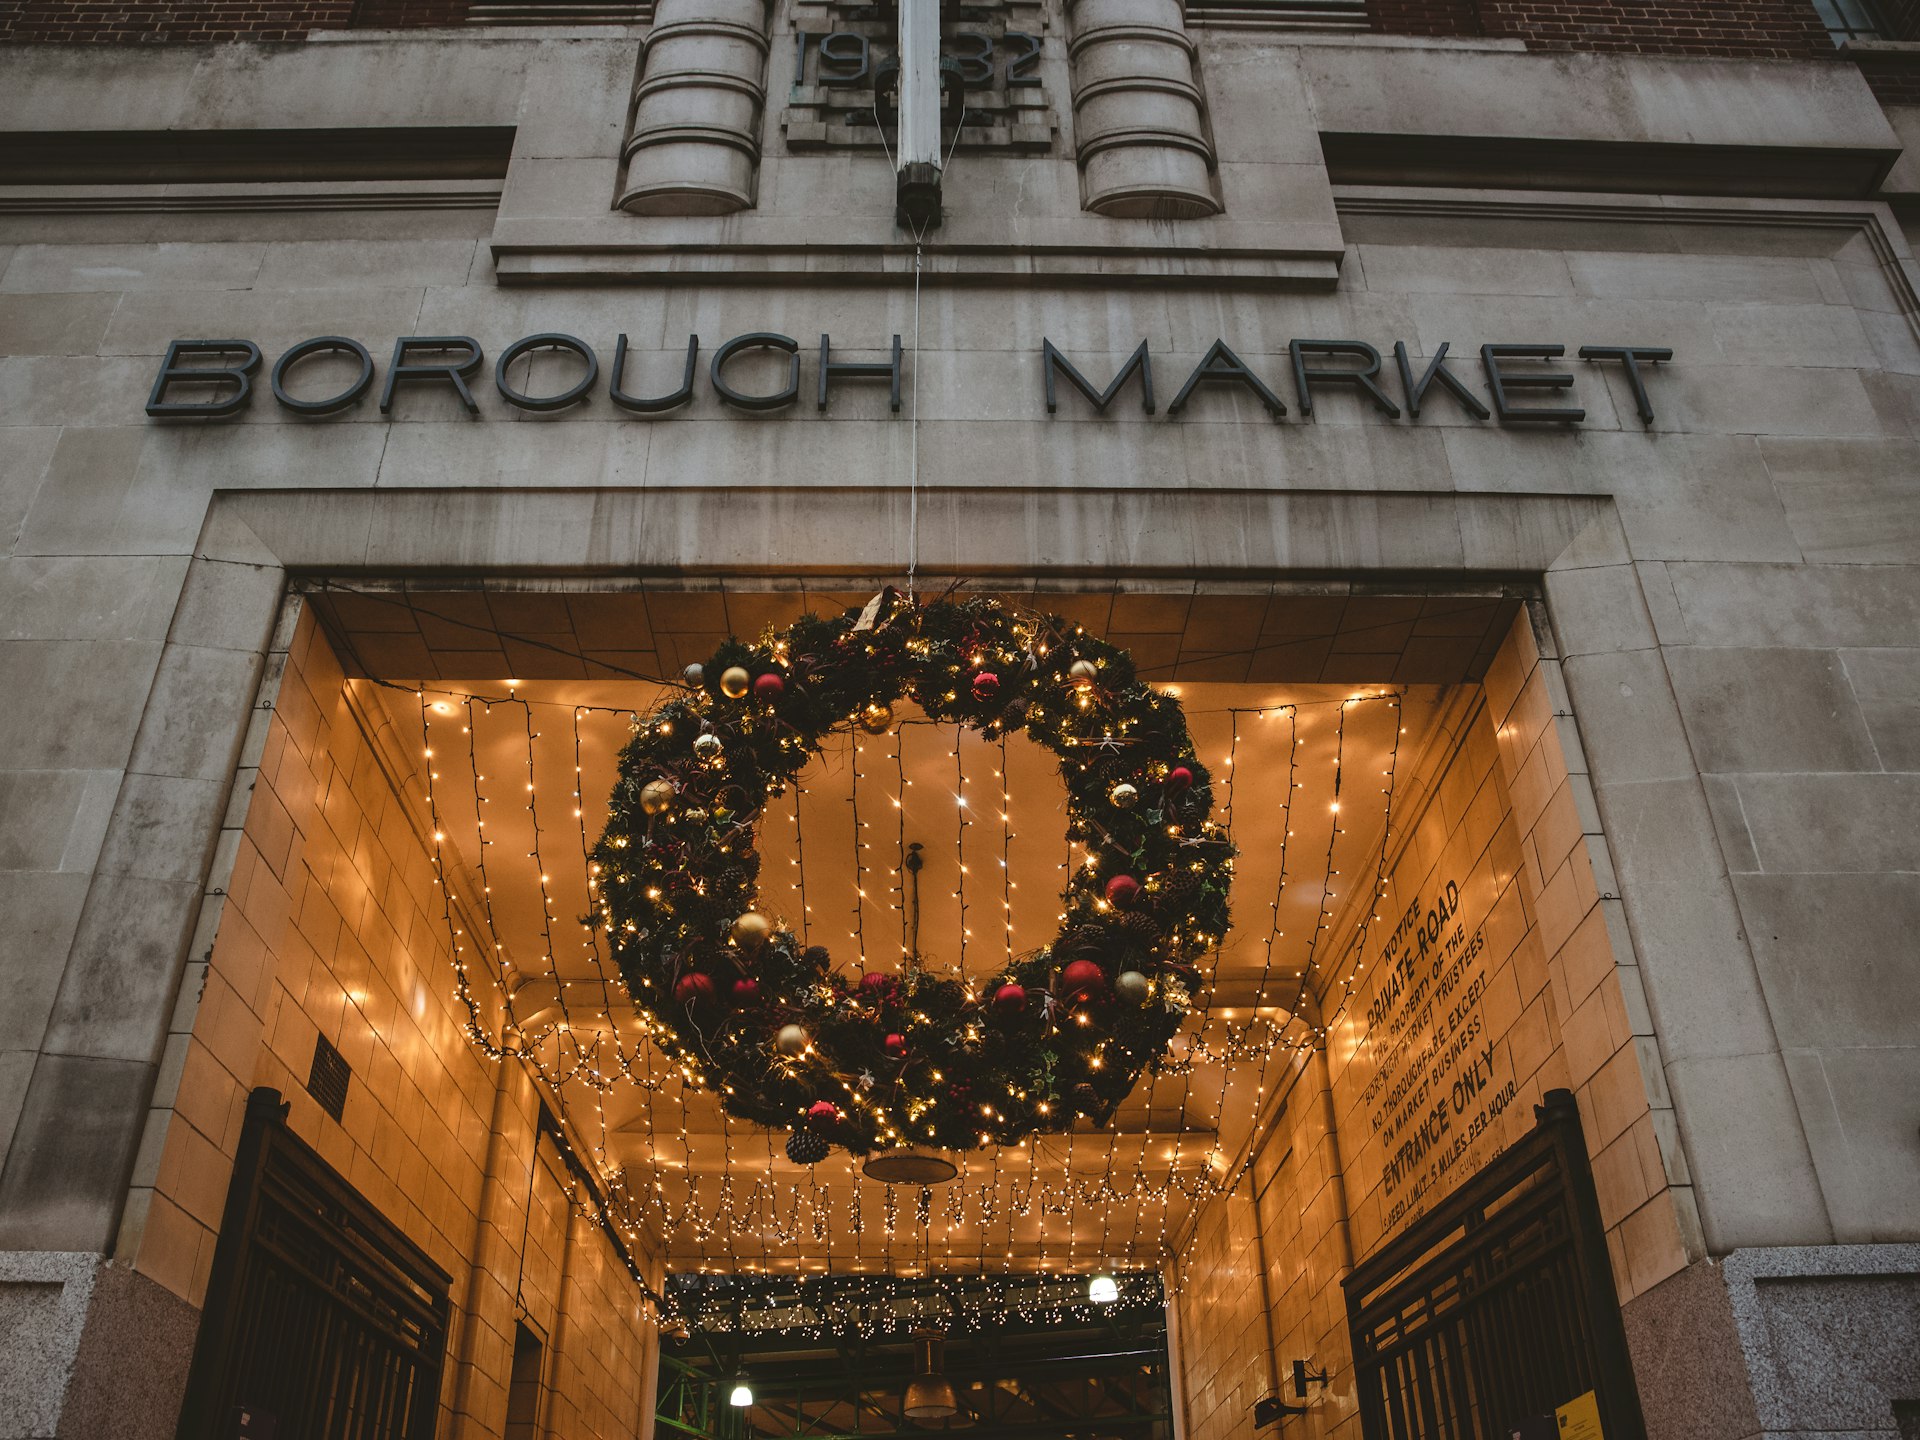 A huge Christmas wreath and fairy lights suspended below the entrance to Borough Market in London, UK